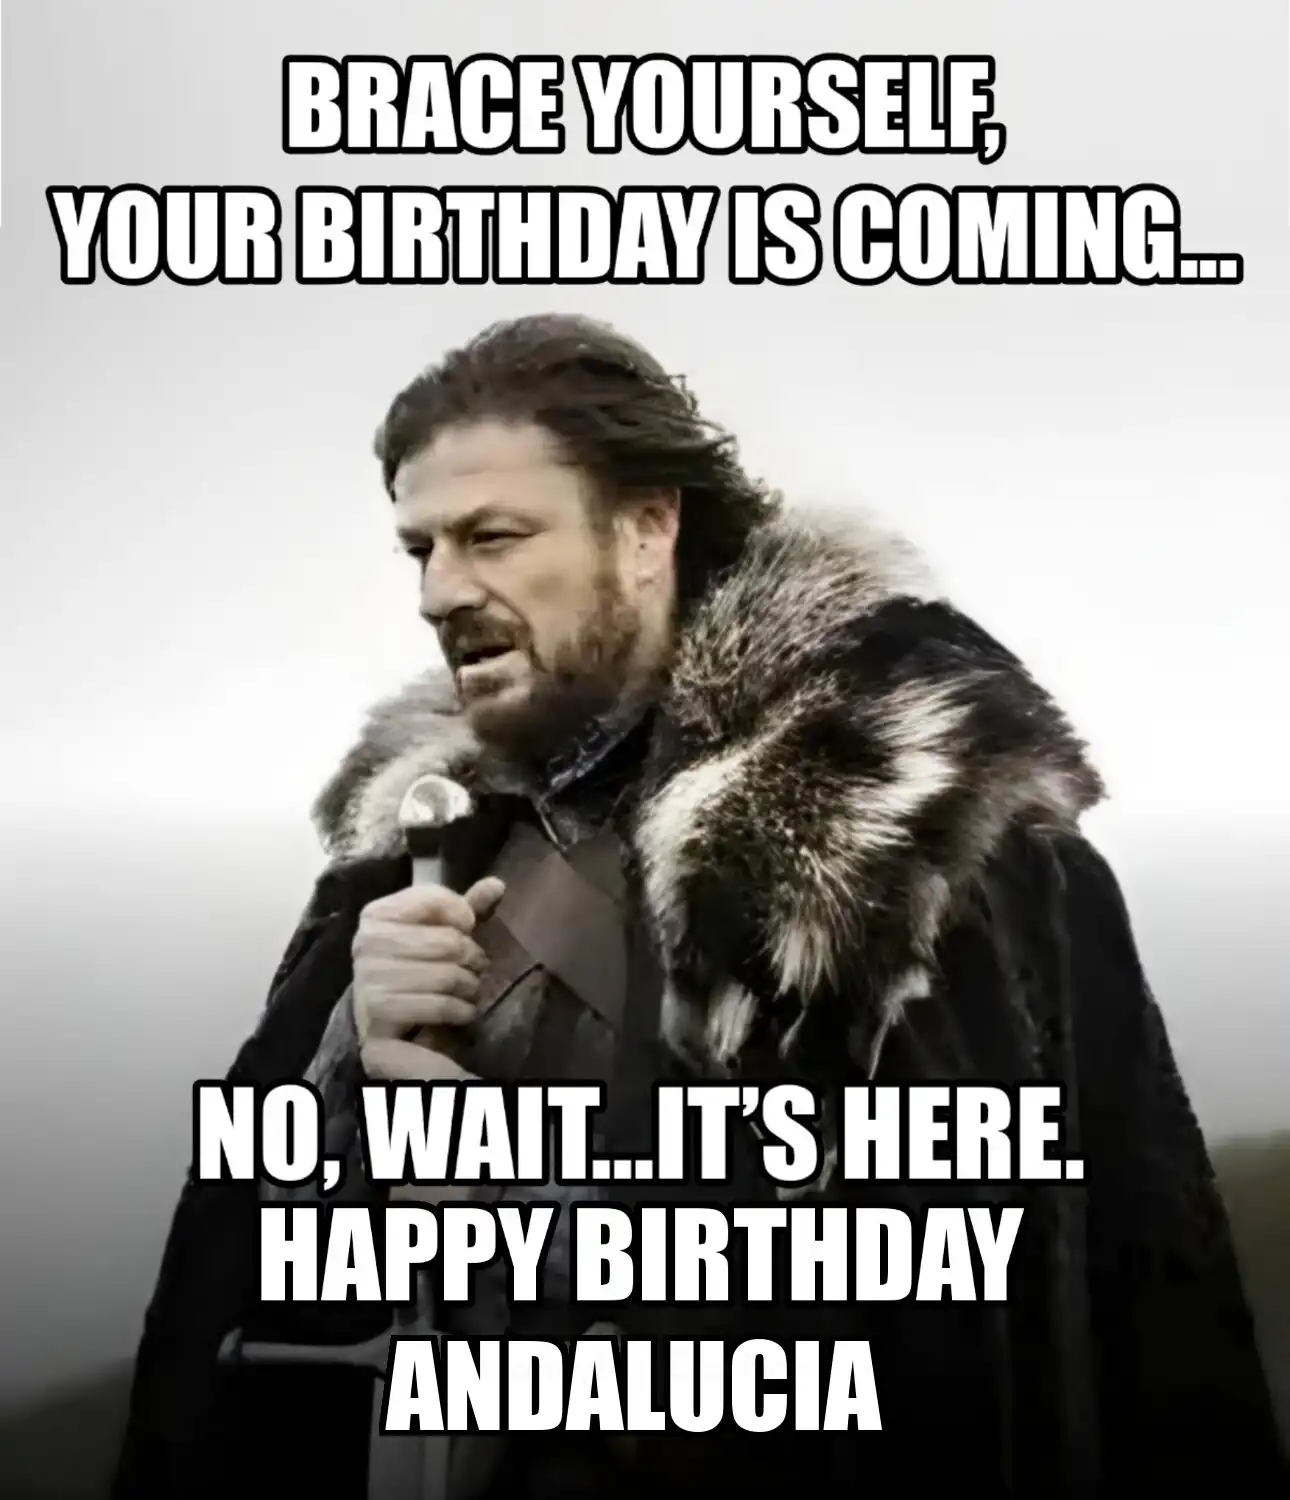 Happy Birthday Andalucia Brace Yourself Your Birthday Is Coming Meme